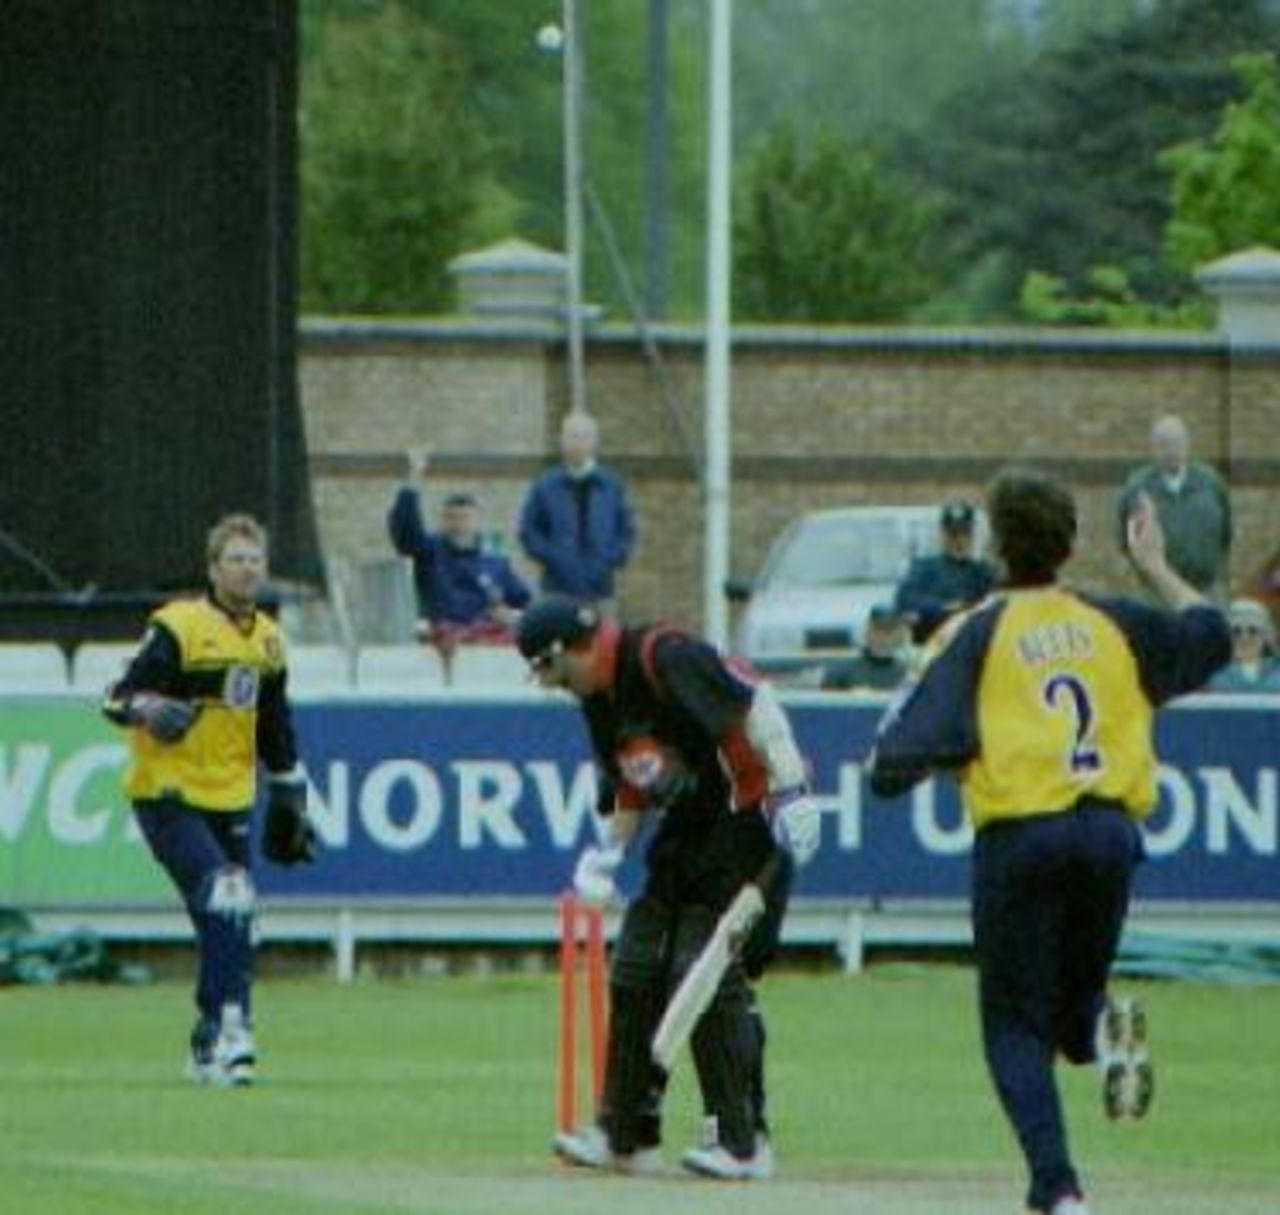 Robert Croft bowled by Melvyn Betts in the National League, 21st May 2000